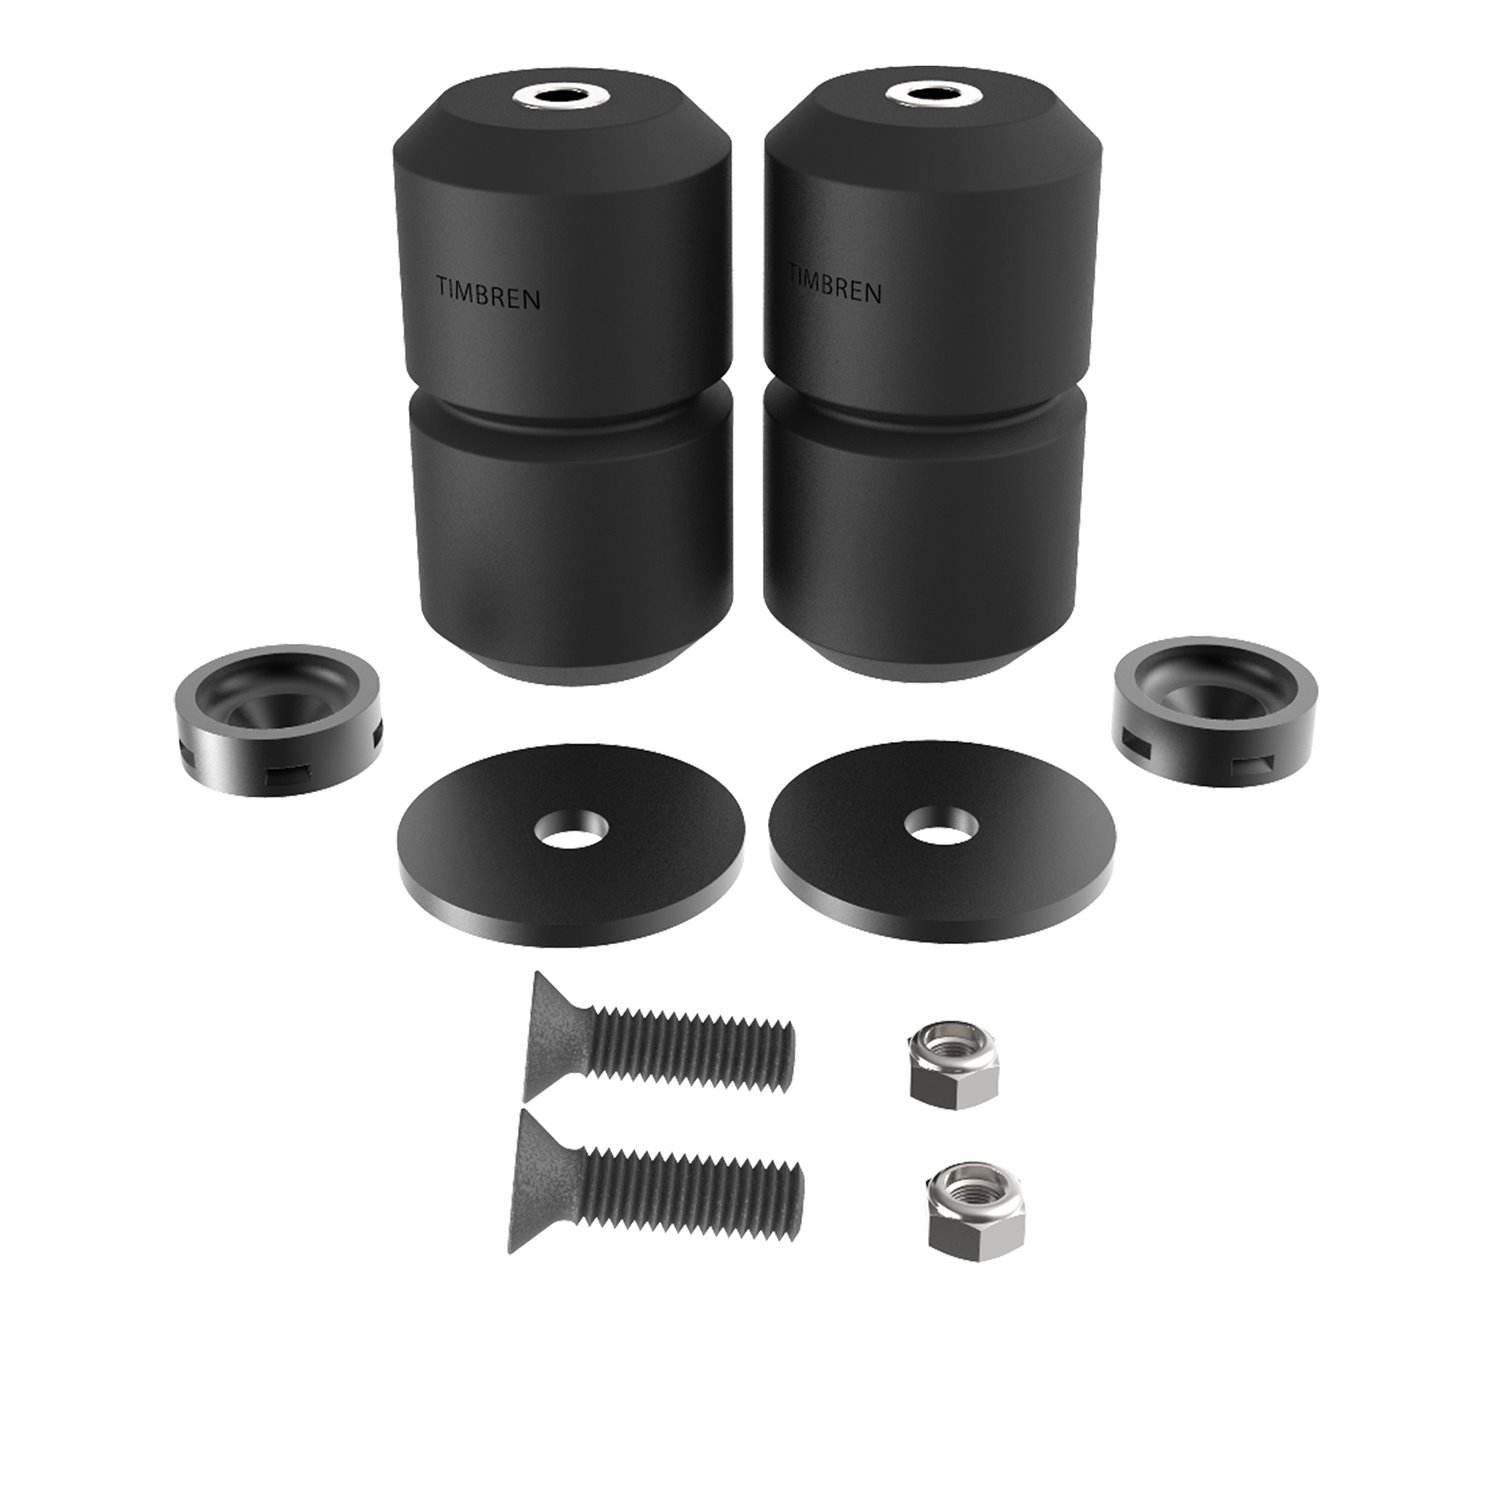 GMRHHR SES Suspension Enhancement System Rear Kit for 2006-2011 Chevy HHR [Rated Capacity: 1300 lbs.]